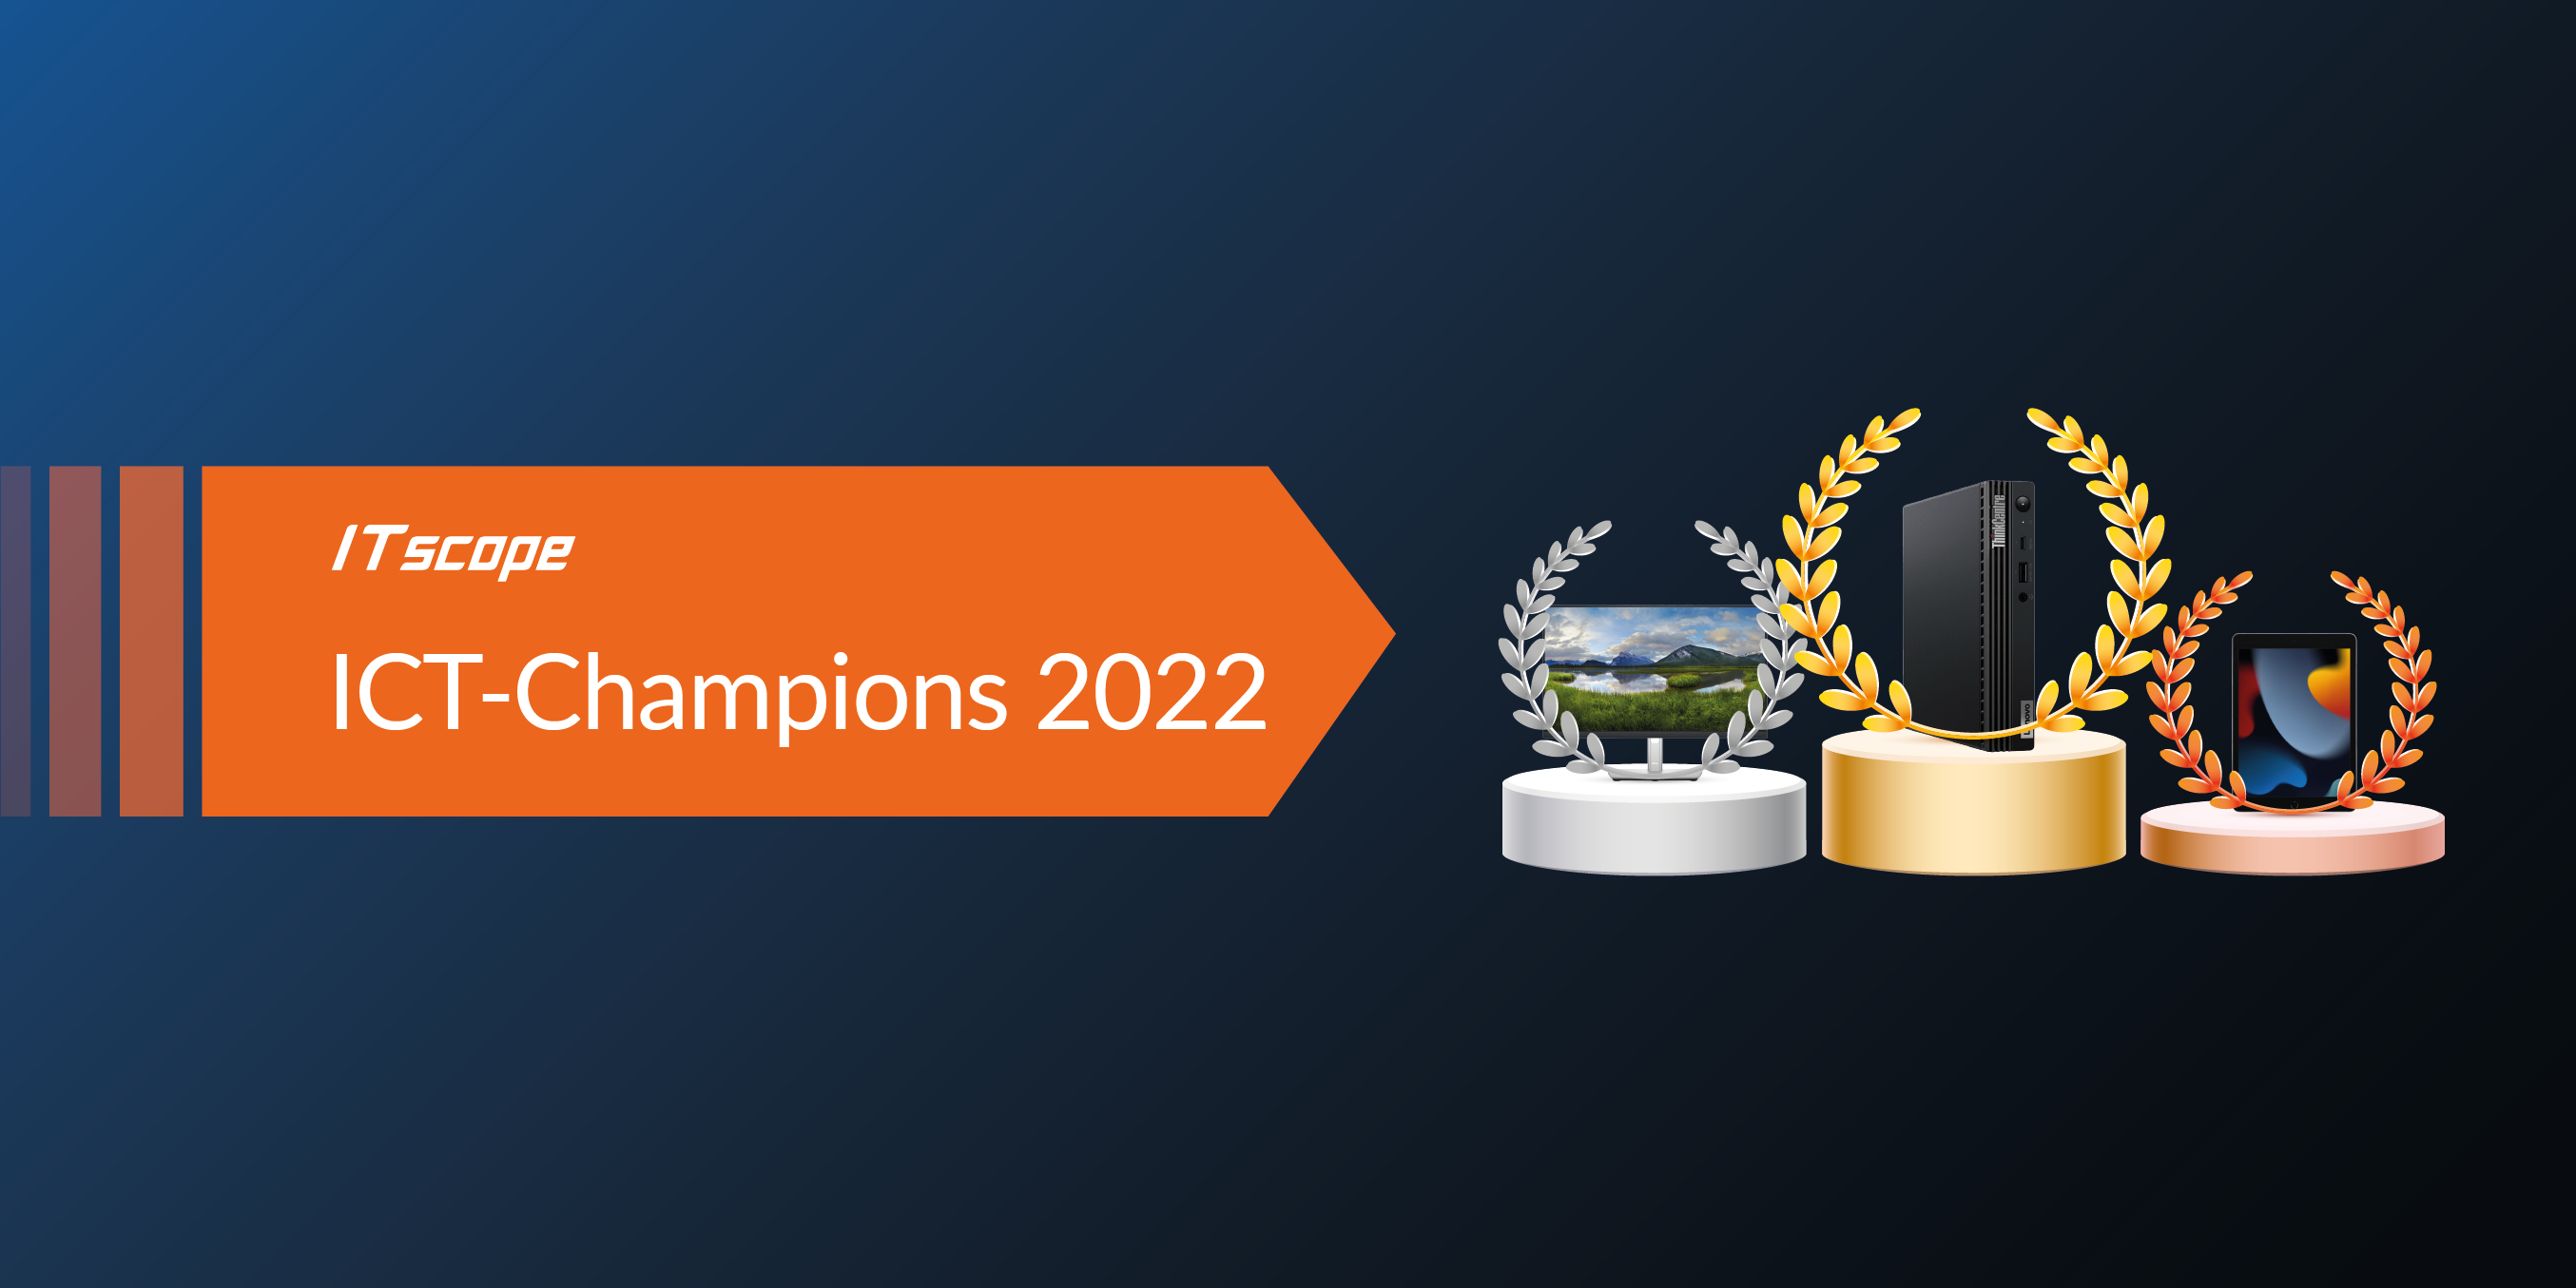 Notebooks, monitors and smartphones are the ITscope ITC champions 2021